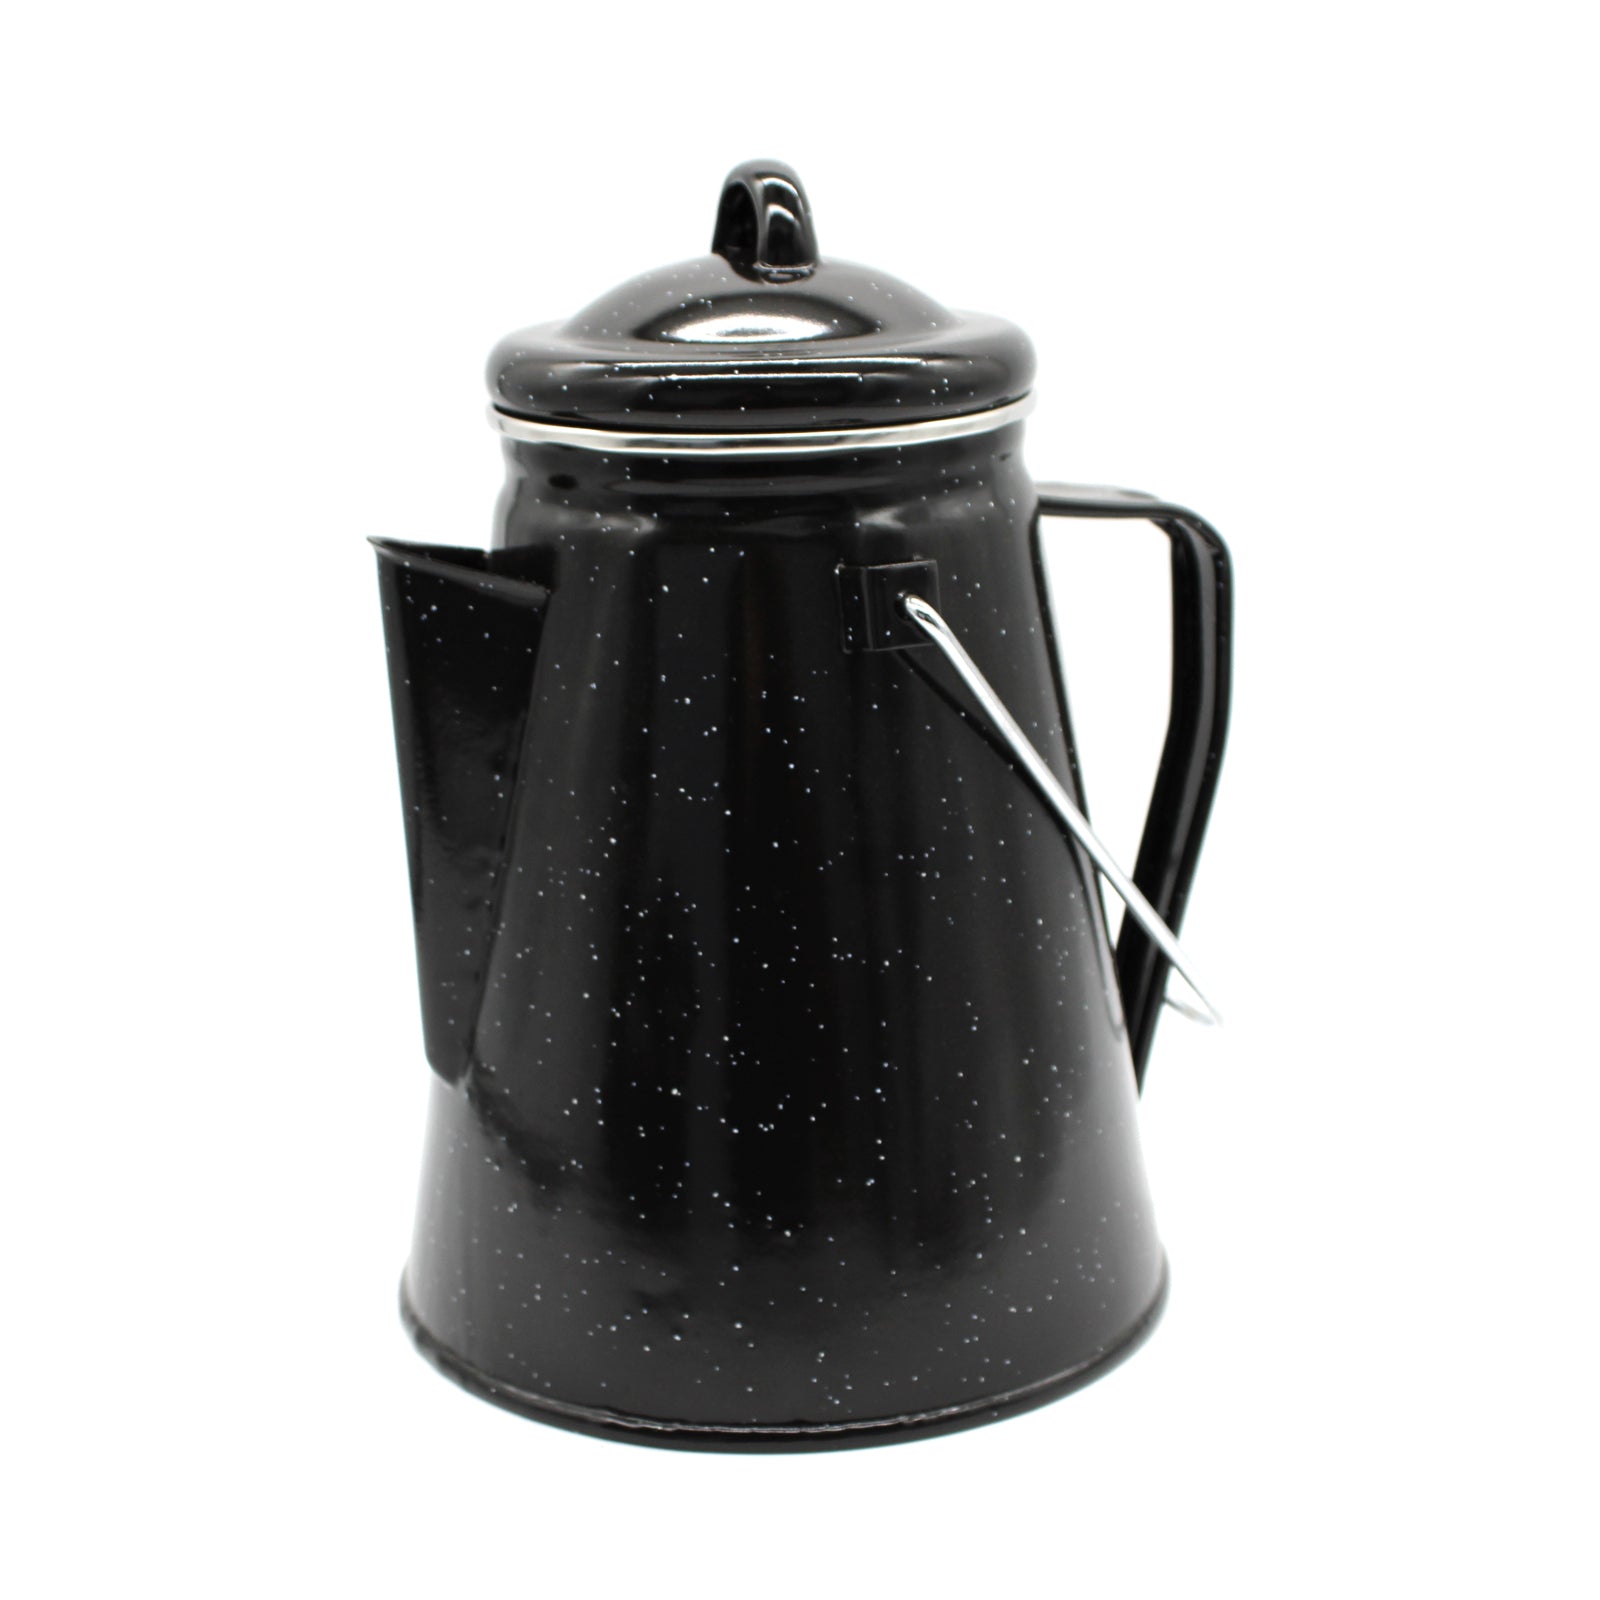 Camping kettle with lid for making tea and coffee outdoors